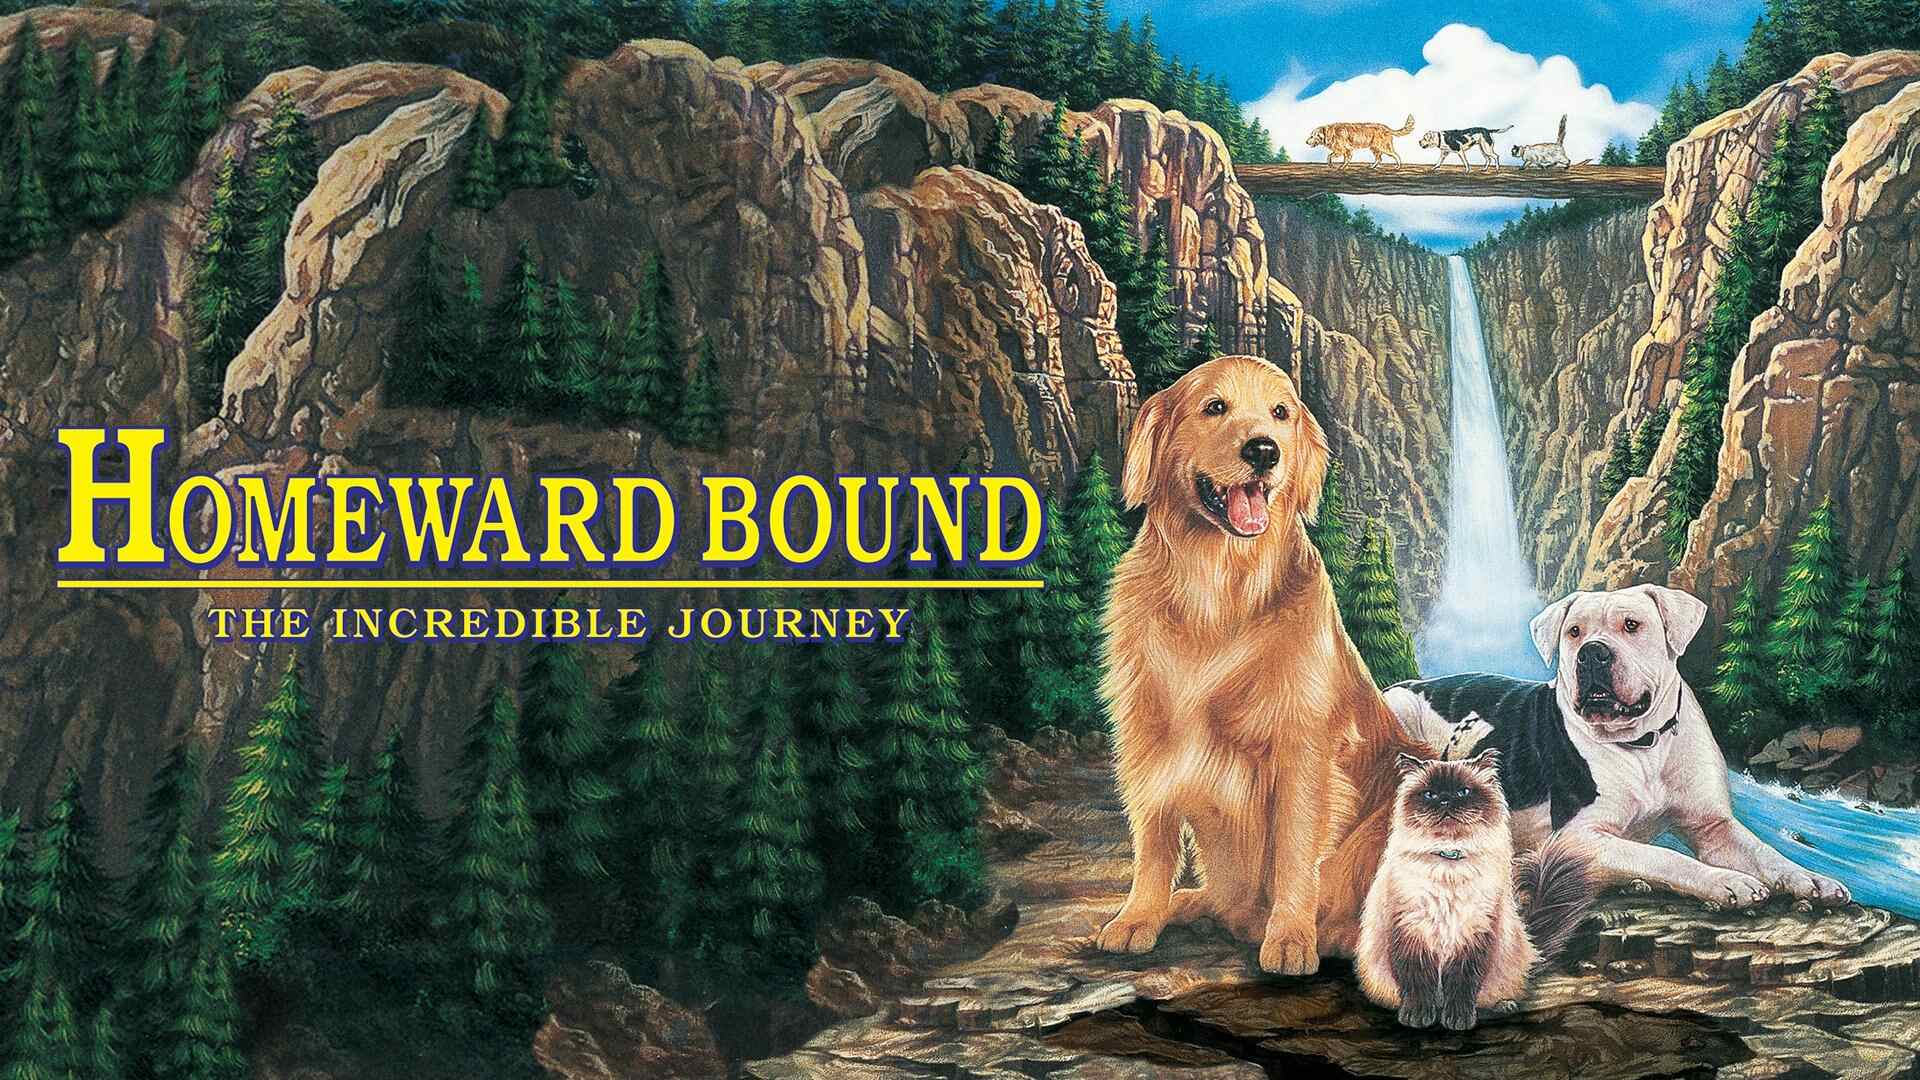 45 Facts about the movie Homeward Bound: The Incredible Journey - Facts.net